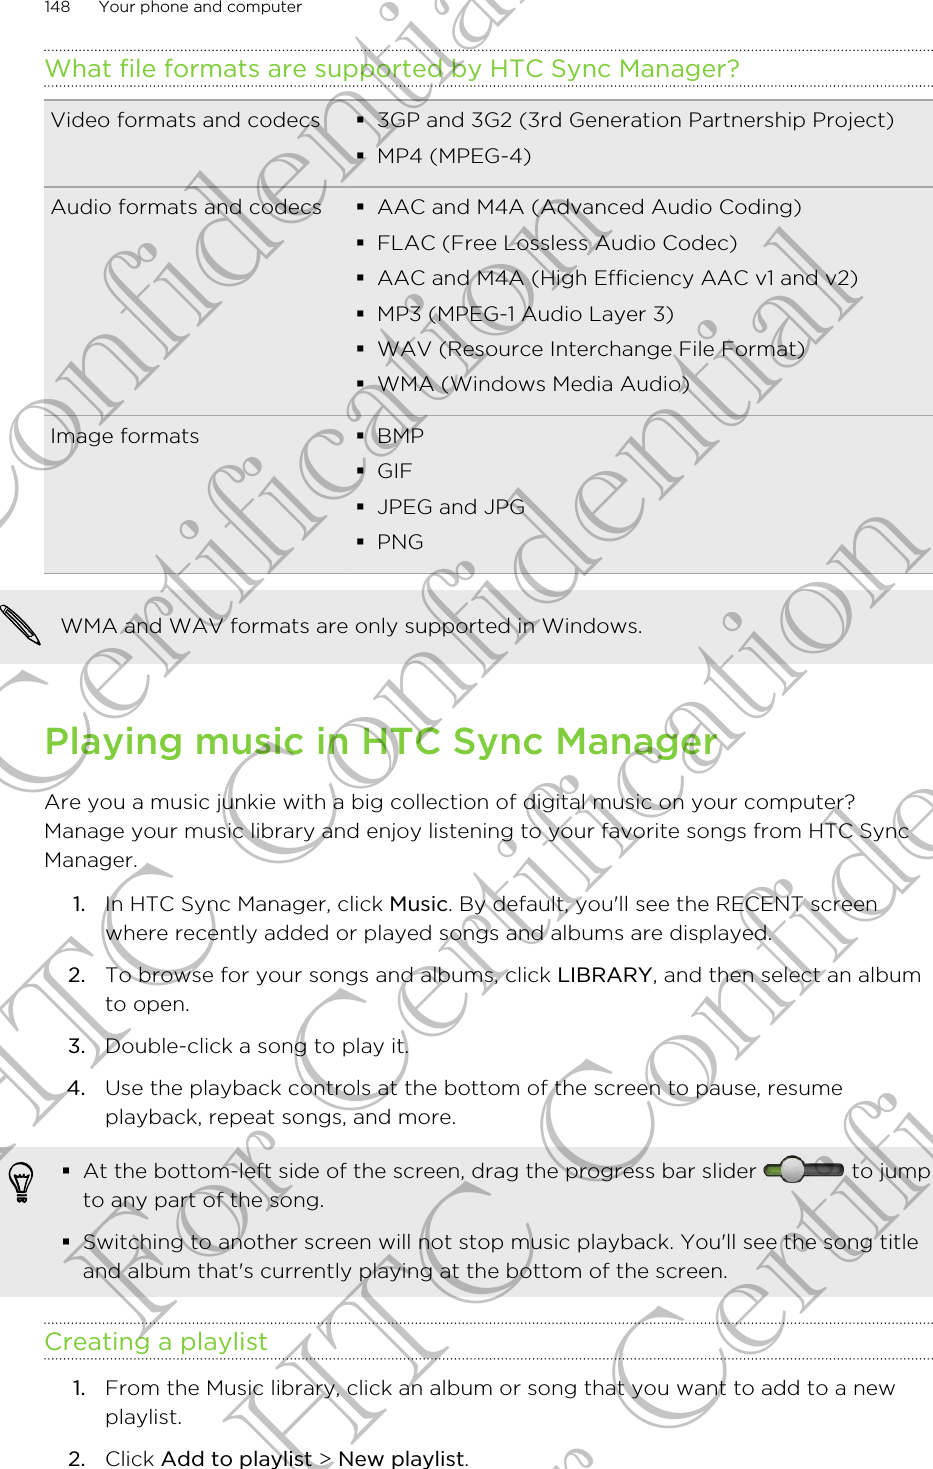 What file formats are supported by HTC Sync Manager?Video formats and codecs §3GP and 3G2 (3rd Generation Partnership Project)§MP4 (MPEG-4)Audio formats and codecs §AAC and M4A (Advanced Audio Coding)§FLAC (Free Lossless Audio Codec)§AAC and M4A (High Efficiency AAC v1 and v2)§MP3 (MPEG-1 Audio Layer 3)§WAV (Resource Interchange File Format)§WMA (Windows Media Audio)Image formats §BMP§GIF§JPEG and JPG§PNGWMA and WAV formats are only supported in Windows.Playing music in HTC Sync ManagerAre you a music junkie with a big collection of digital music on your computer?Manage your music library and enjoy listening to your favorite songs from HTC SyncManager.1. In HTC Sync Manager, click Music. By default, you&apos;ll see the RECENT screenwhere recently added or played songs and albums are displayed.2. To browse for your songs and albums, click LIBRARY, and then select an albumto open.3. Double-click a song to play it.4. Use the playback controls at the bottom of the screen to pause, resumeplayback, repeat songs, and more.§At the bottom-left side of the screen, drag the progress bar slider   to jumpto any part of the song.§Switching to another screen will not stop music playback. You&apos;ll see the song titleand album that&apos;s currently playing at the bottom of the screen.Creating a playlist1. From the Music library, click an album or song that you want to add to a newplaylist.2. Click Add to playlist &gt; New playlist.148 Your phone and computerHTC Confidential For Certification HTC Confidential For Certification HTC Confidential For Certification